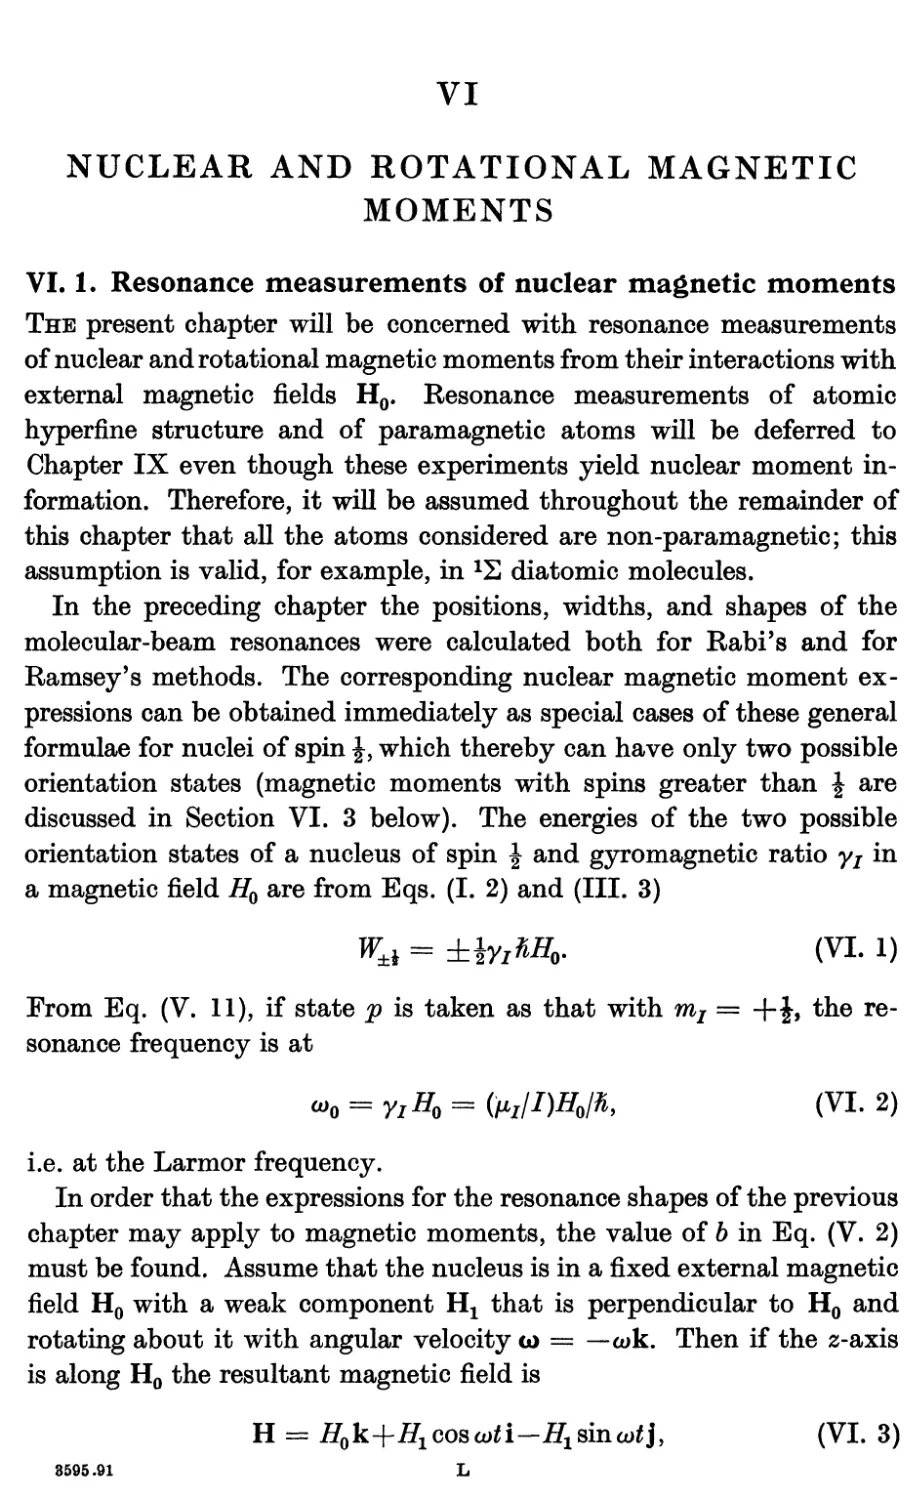 VI. NUCLEAR AND ROTATIONAL MAGNETIC MOMENTS